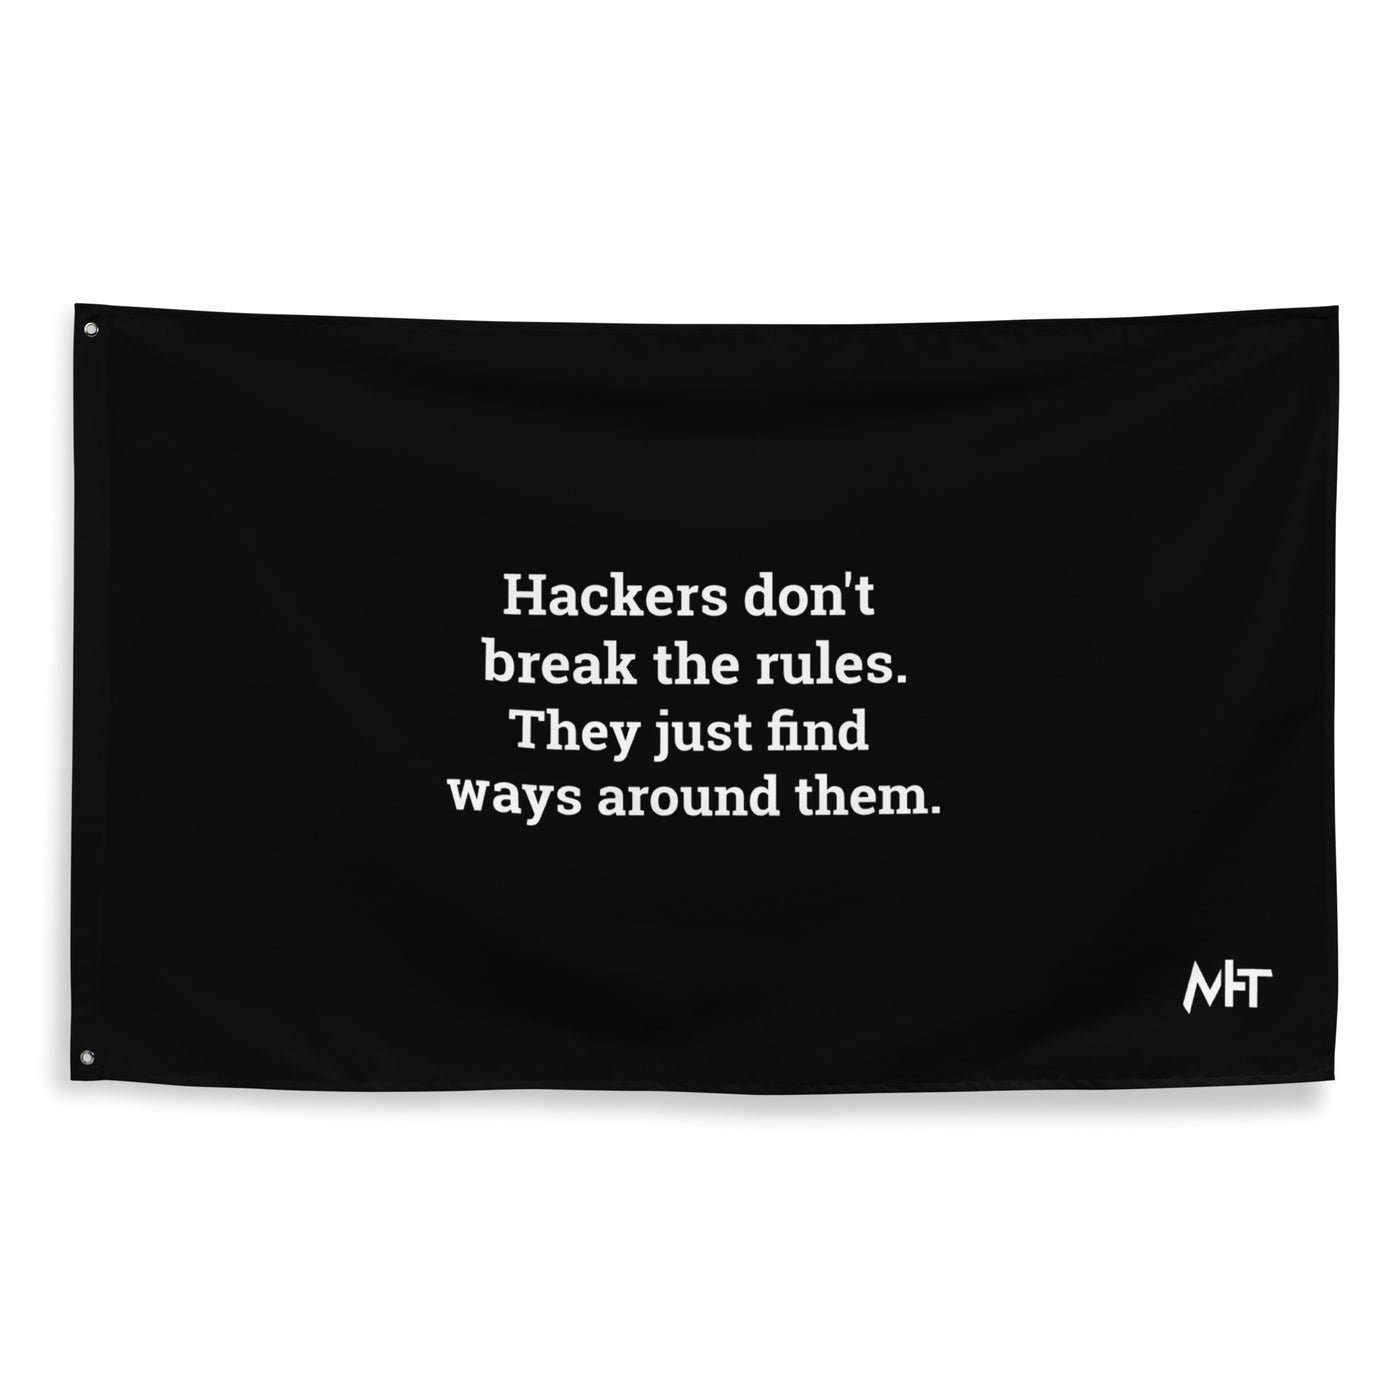 Hackers don't break the rules, they just find ways around them - Flag